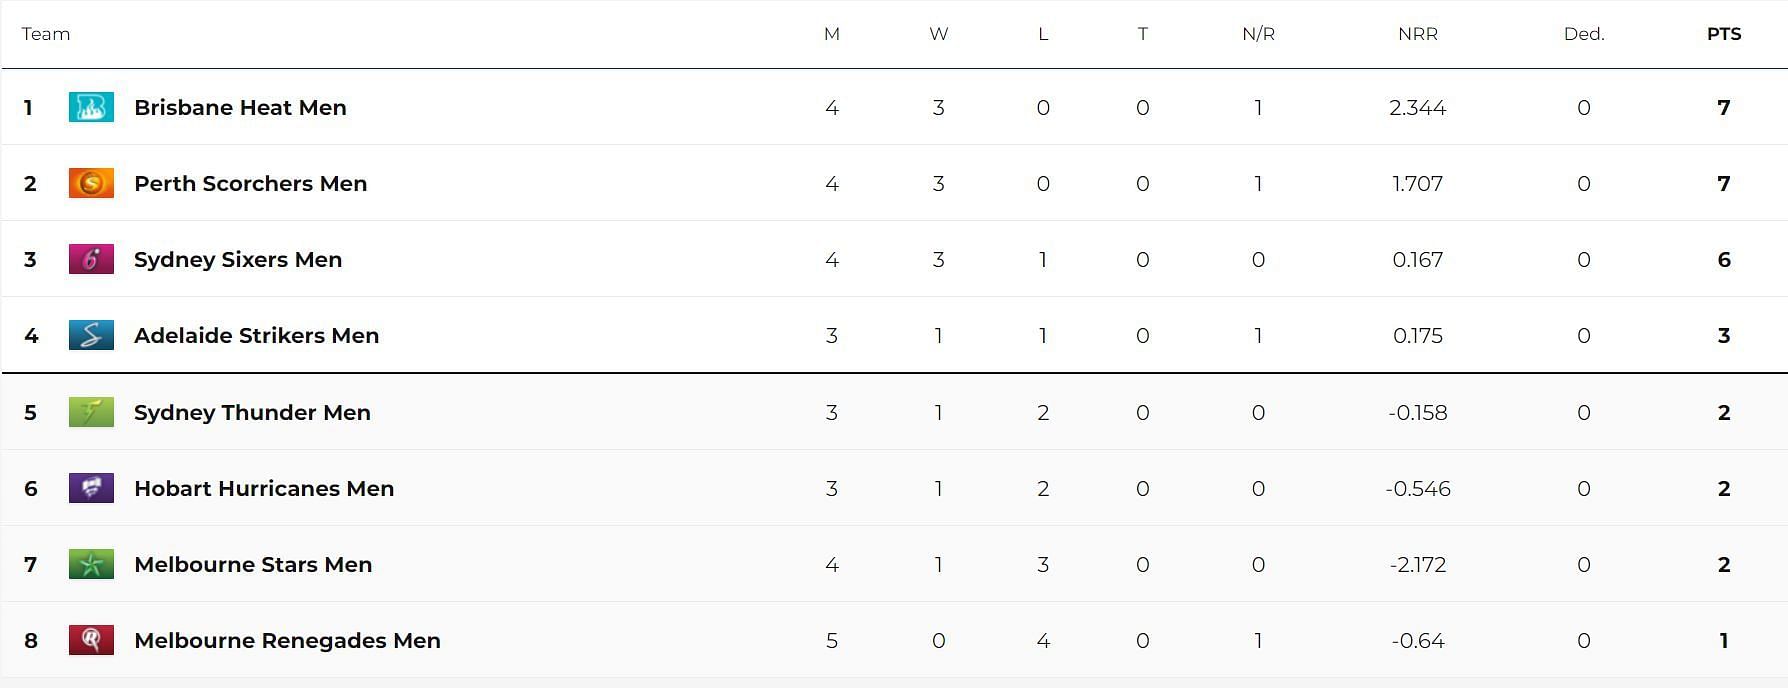 Updated Points Table after Match 15 (Image Courtesy: cricket.com.au)